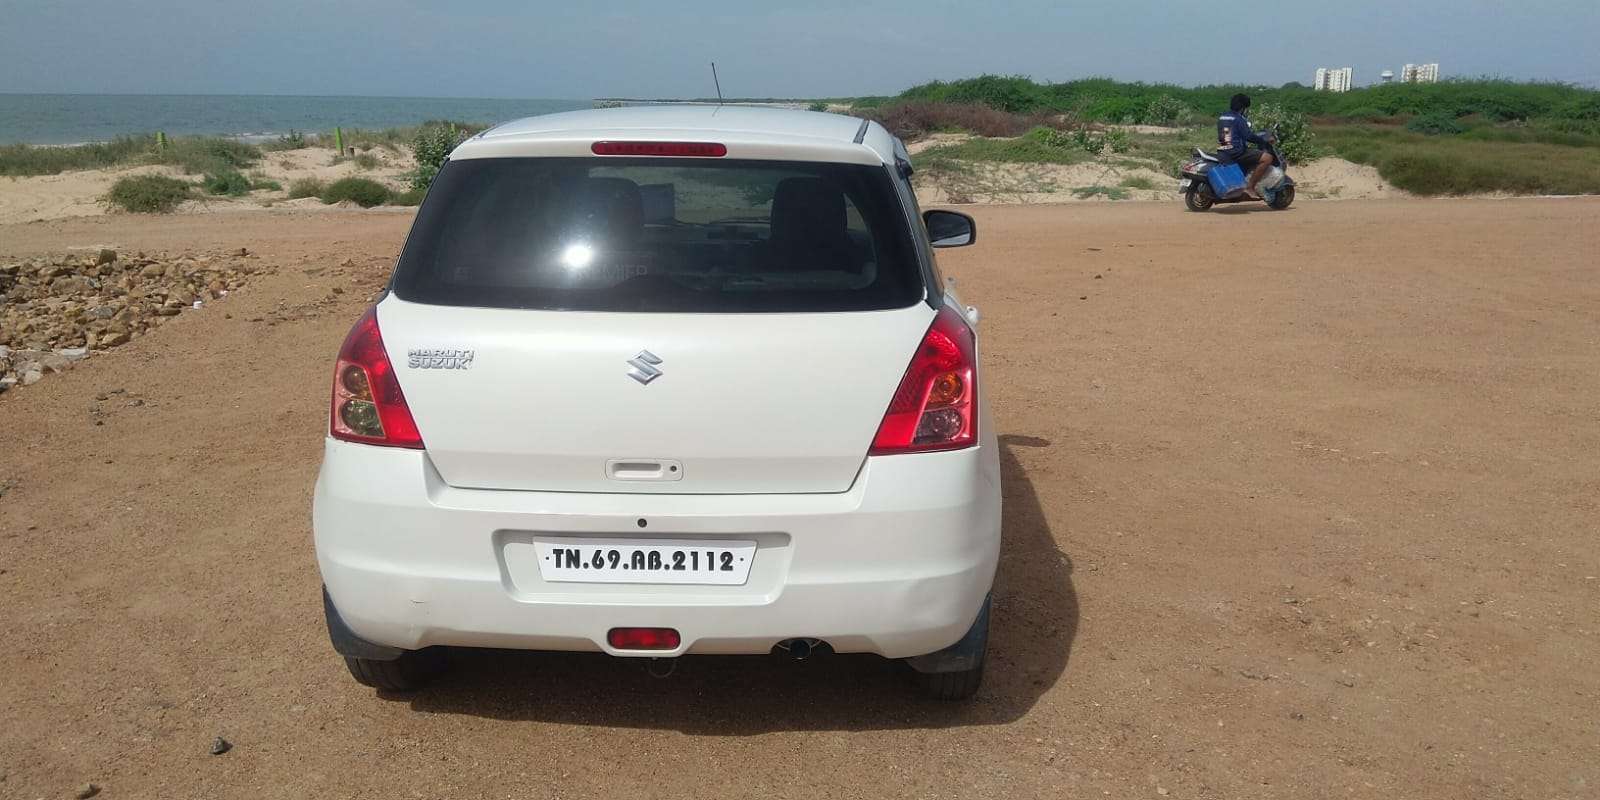 2079-for-sale-Maruthi-Suzuki-Swift-Petrol-Third-Owner-2010-TN-registered-rs-305000